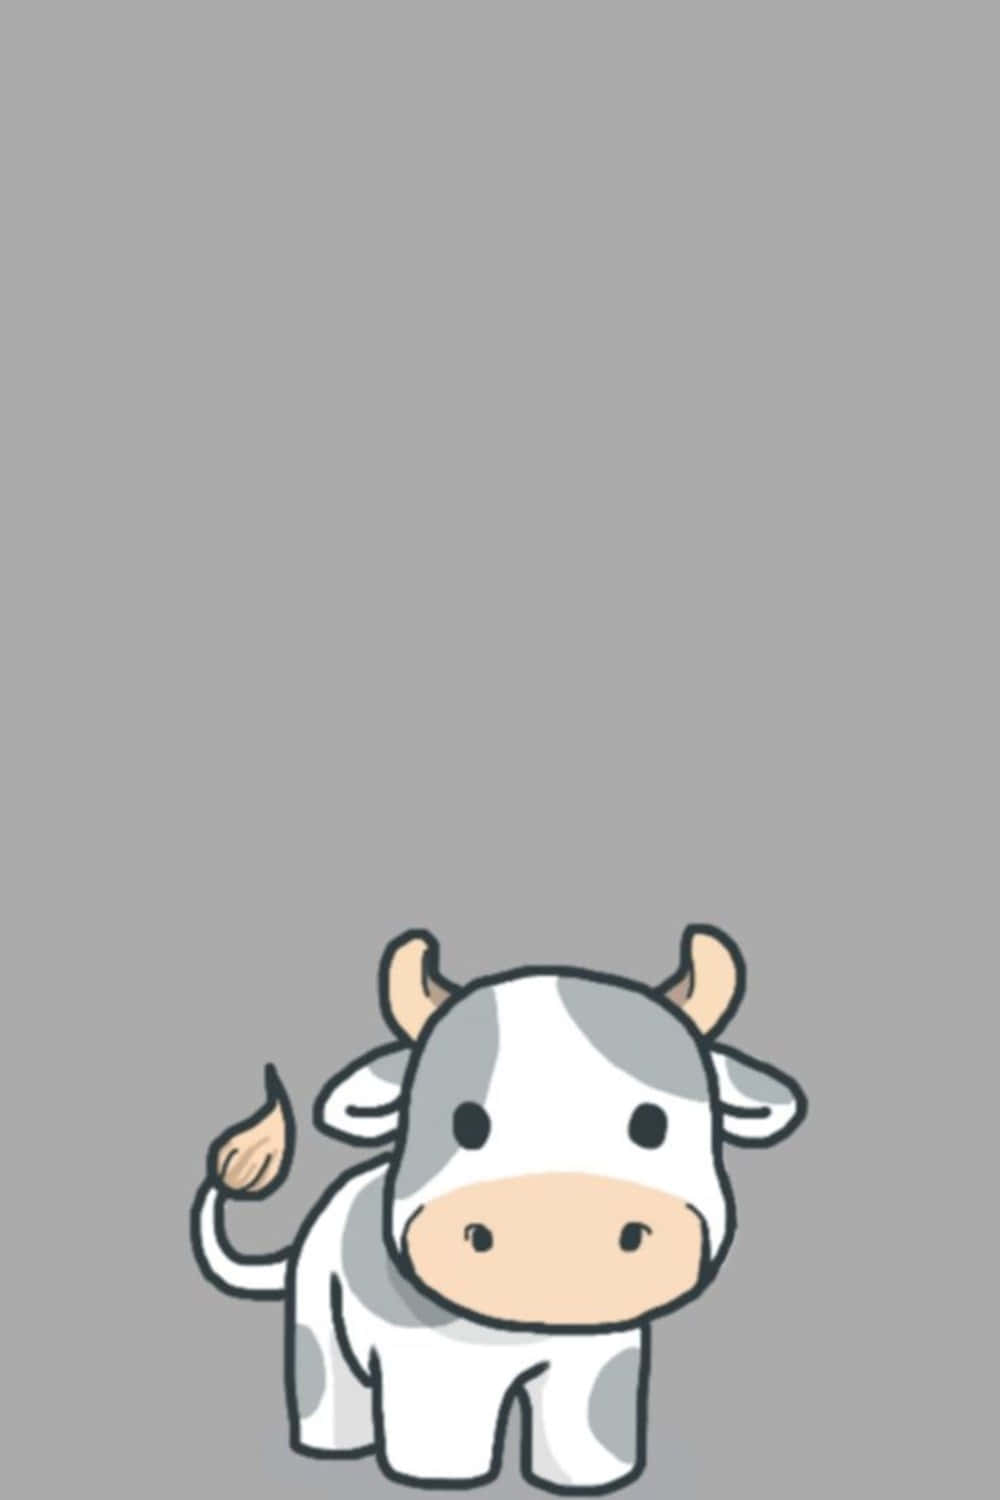 A Cow With Horns On A Gray Background Wallpaper